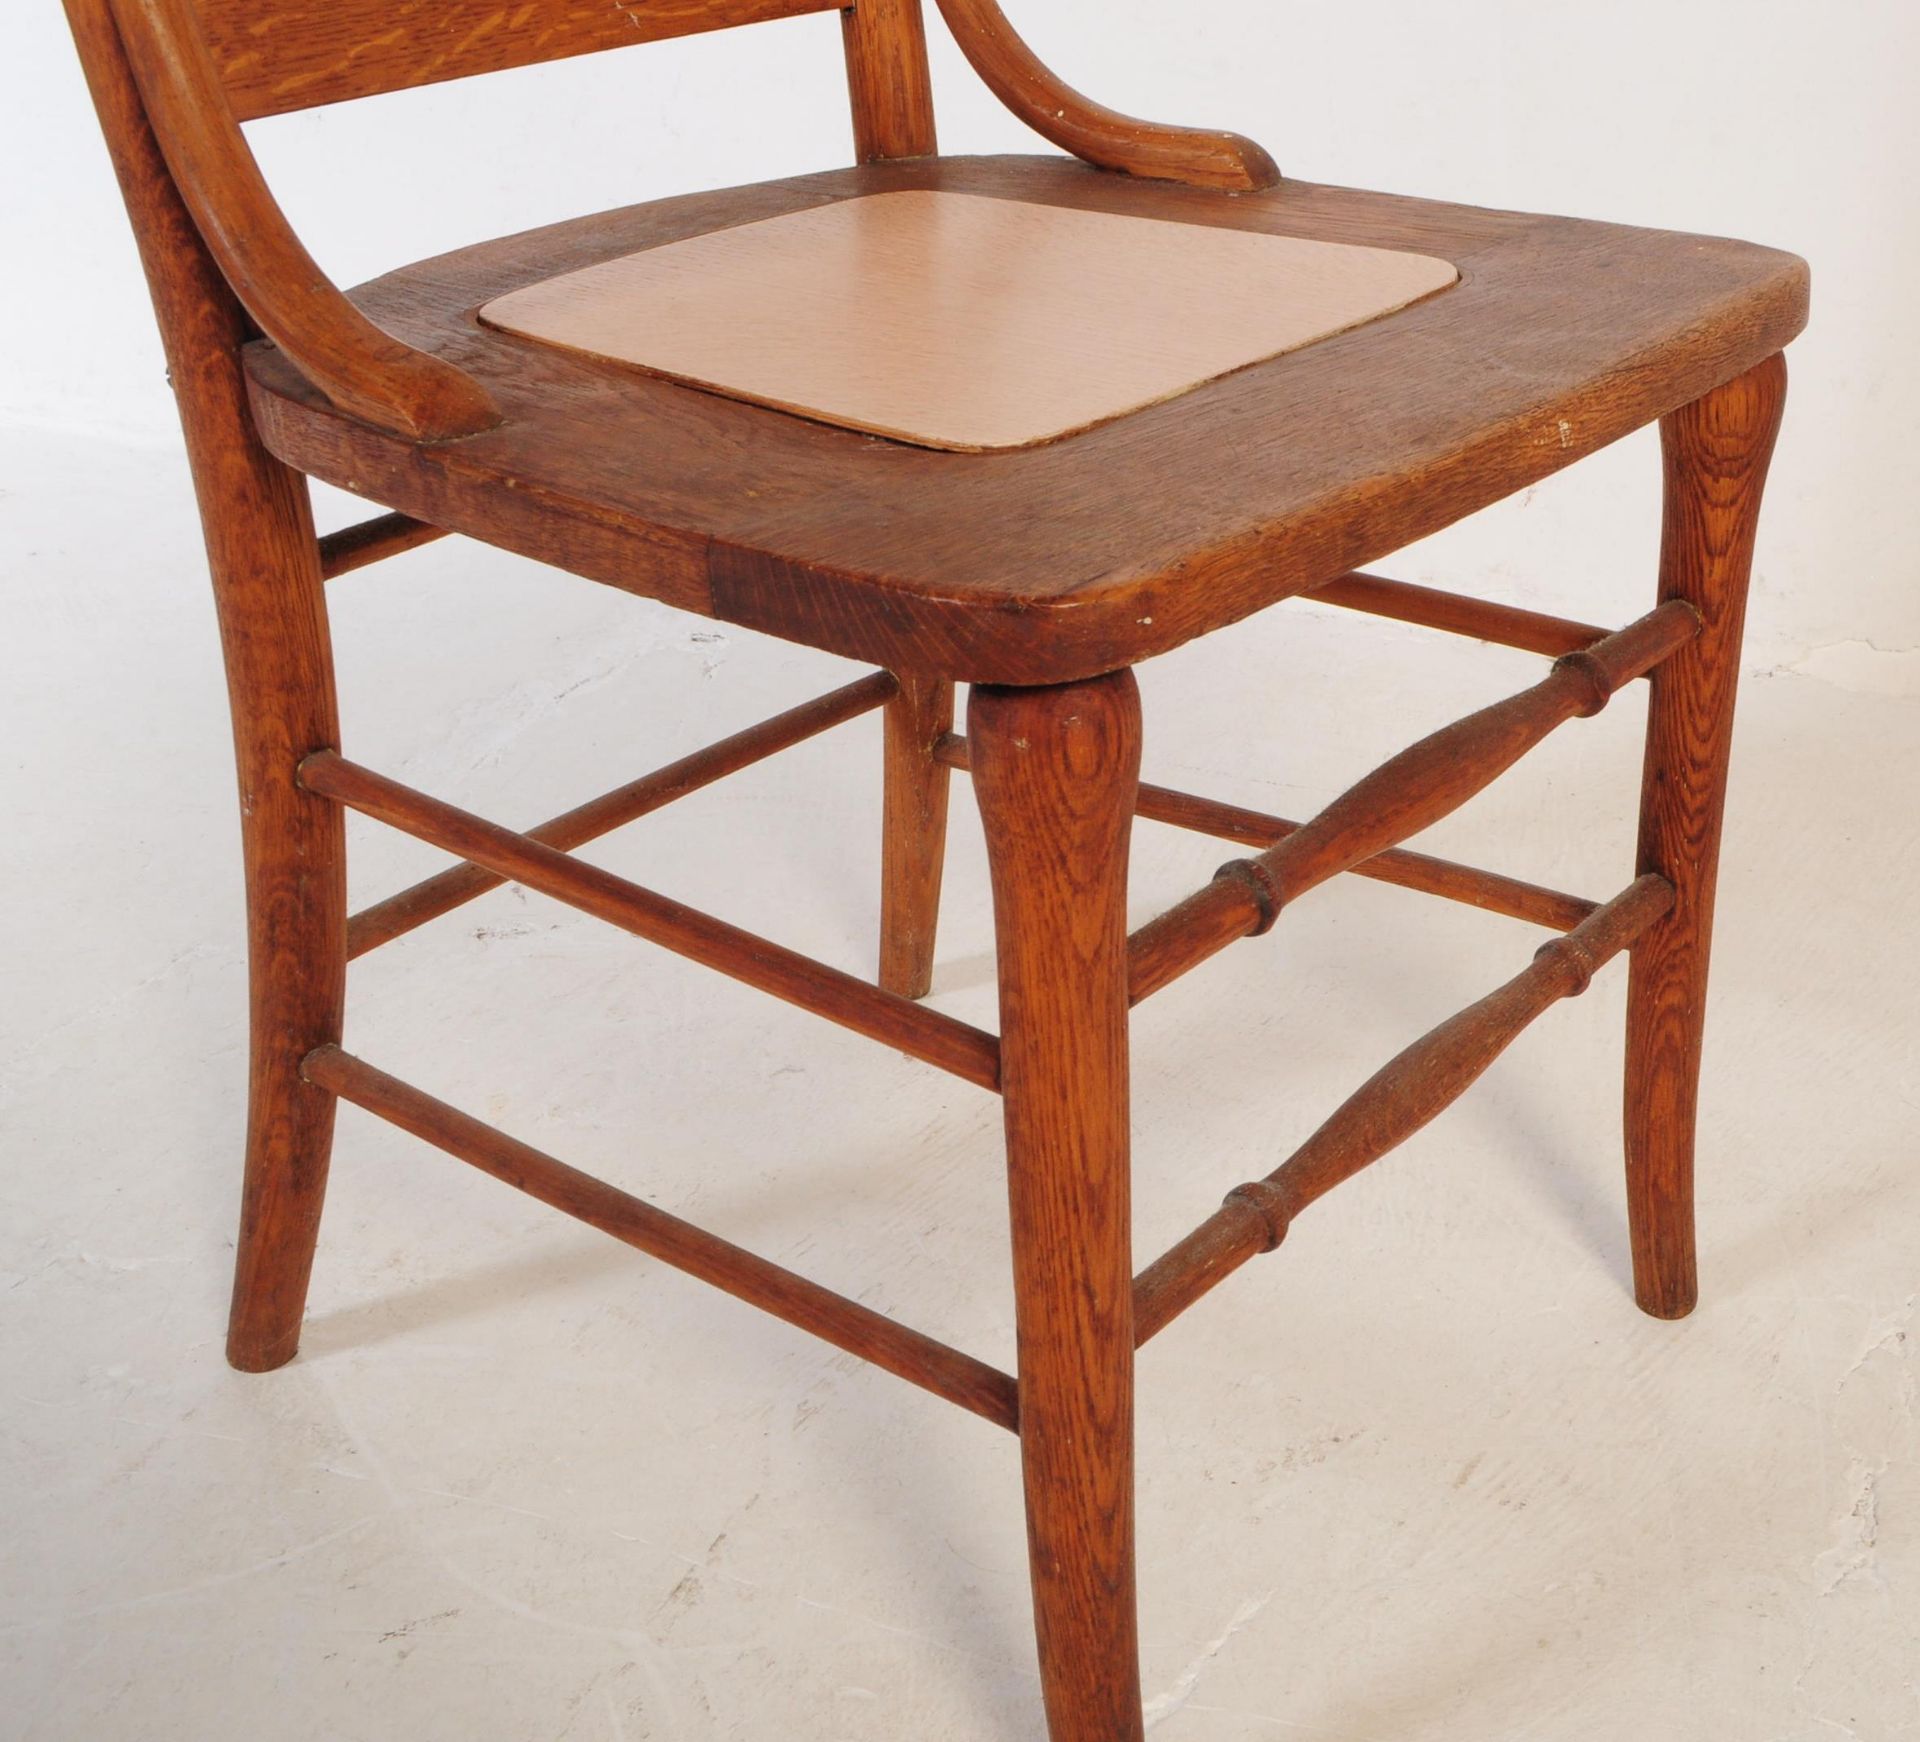 EARLY 20TH CENTURY ARTS & CRAFTS OAK HALL ARMCHAIR - Image 15 of 16